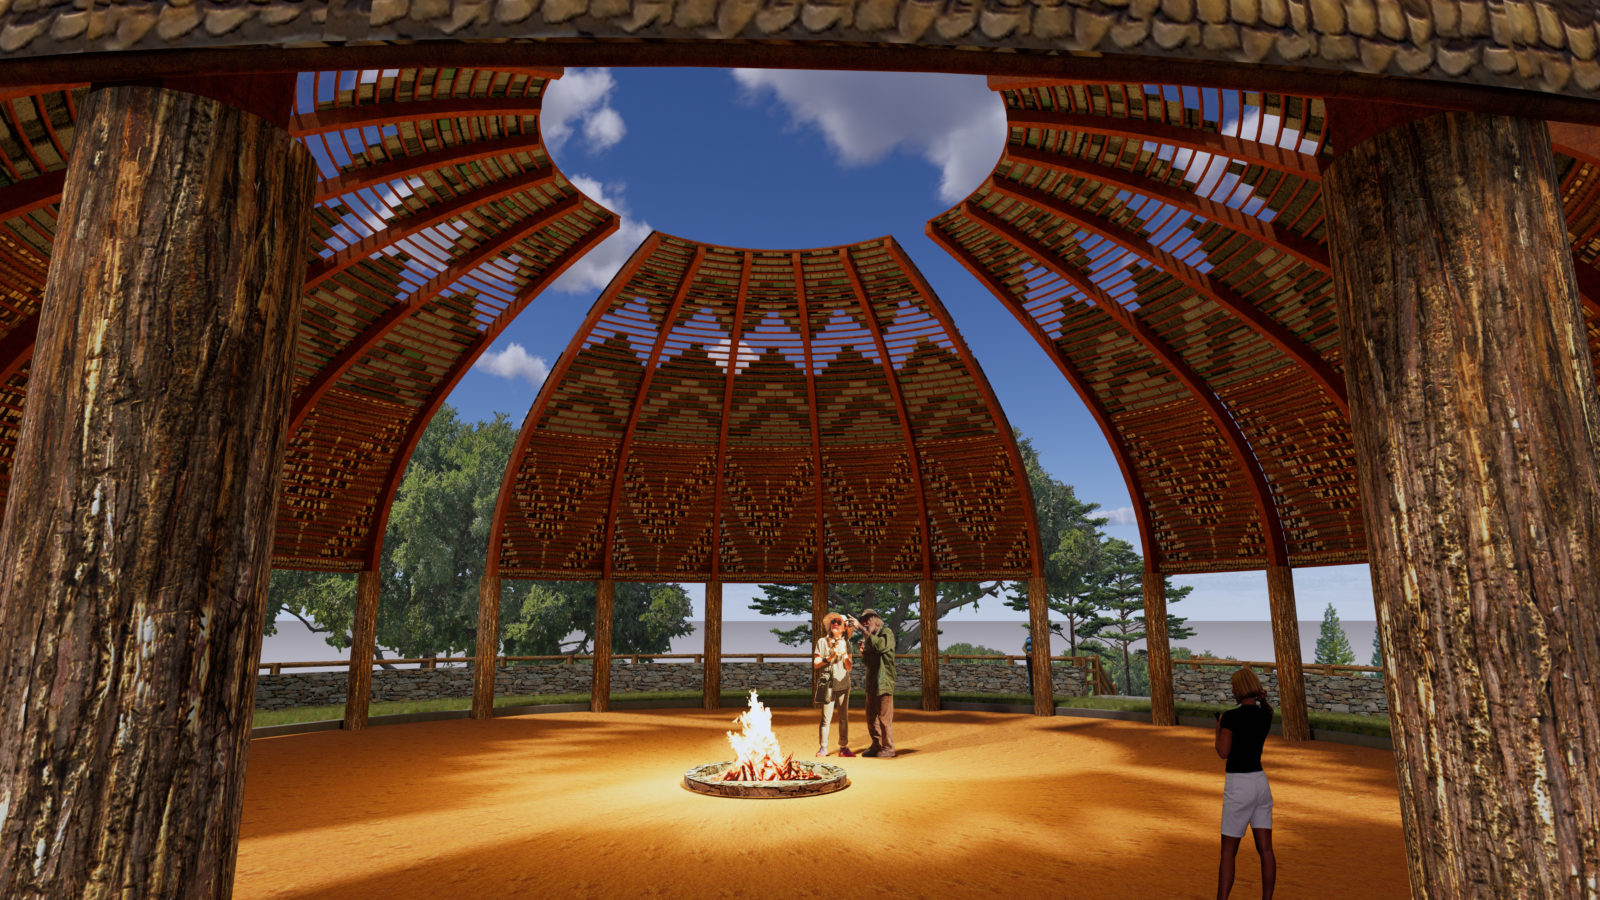 Architectural rendering of a structure, proposed for Rinihmu Pulte'irekne, that represents an upside-down traditional Ohlone basket. To build the structure, the land will have to be rezoned and go through an environmental review. (Courtesy of Sogorea Te’ Land Trust)